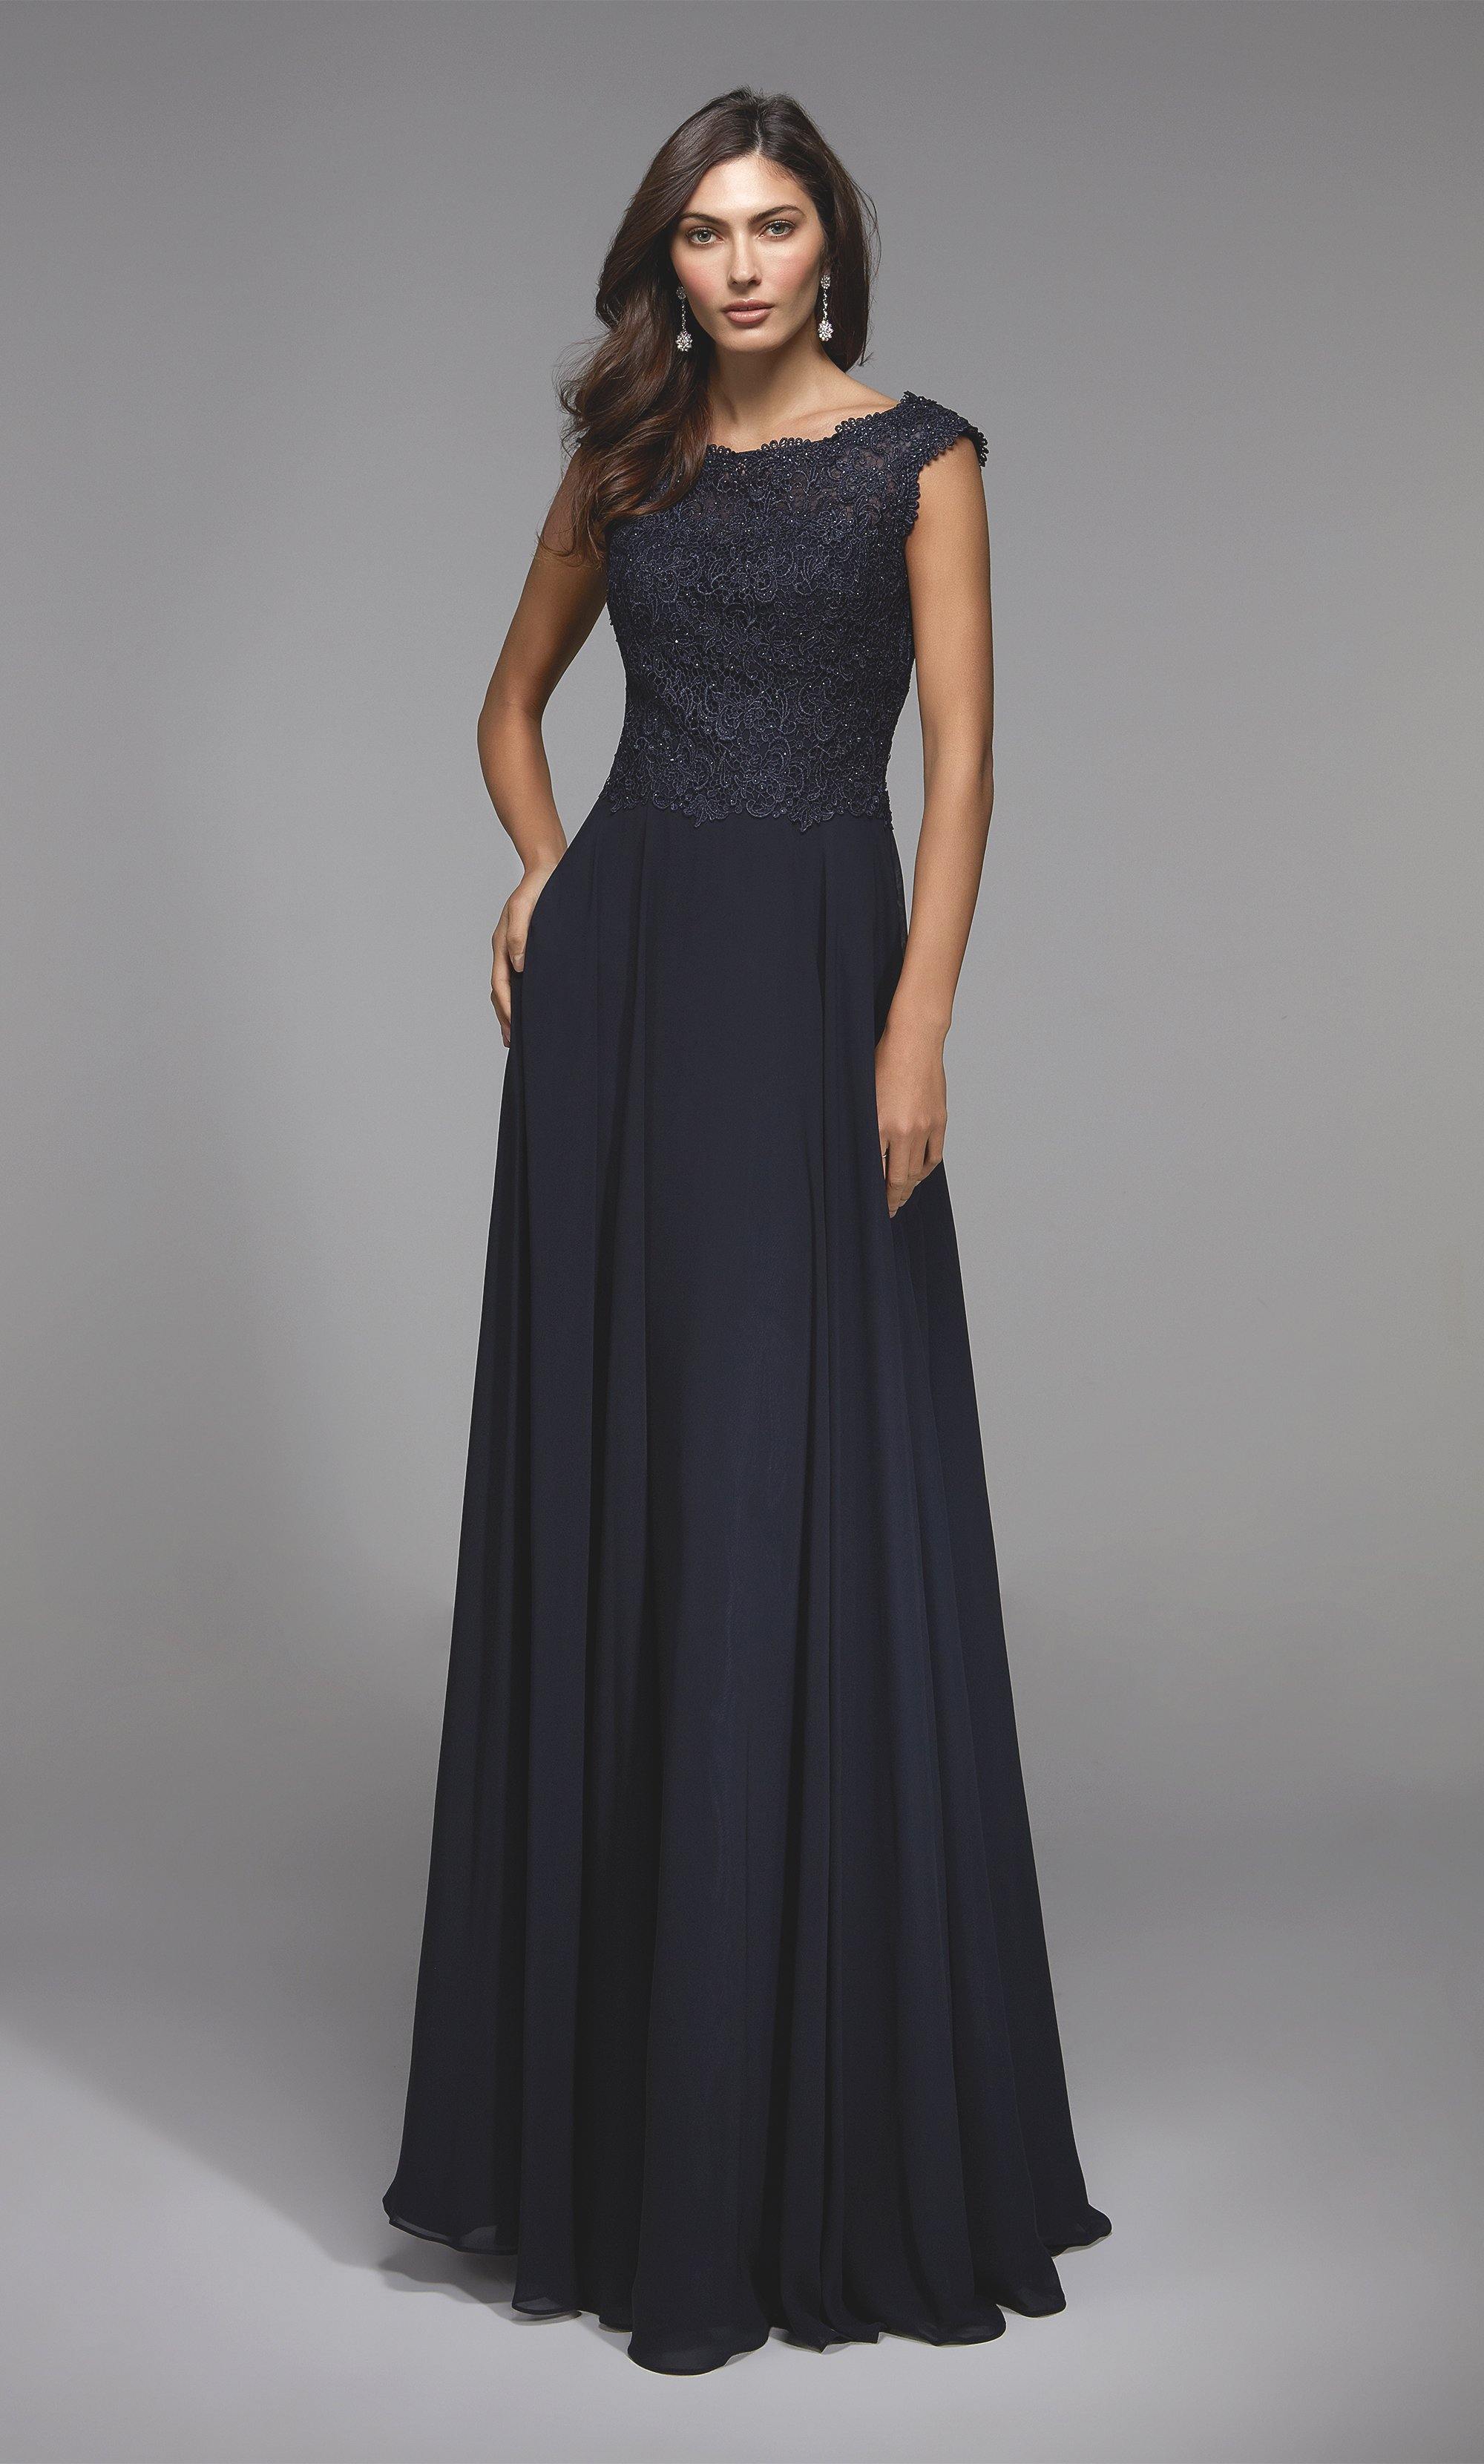 Midnight blue chiffon-lace guest of wedding dress with a scoop neck and capped sleeve